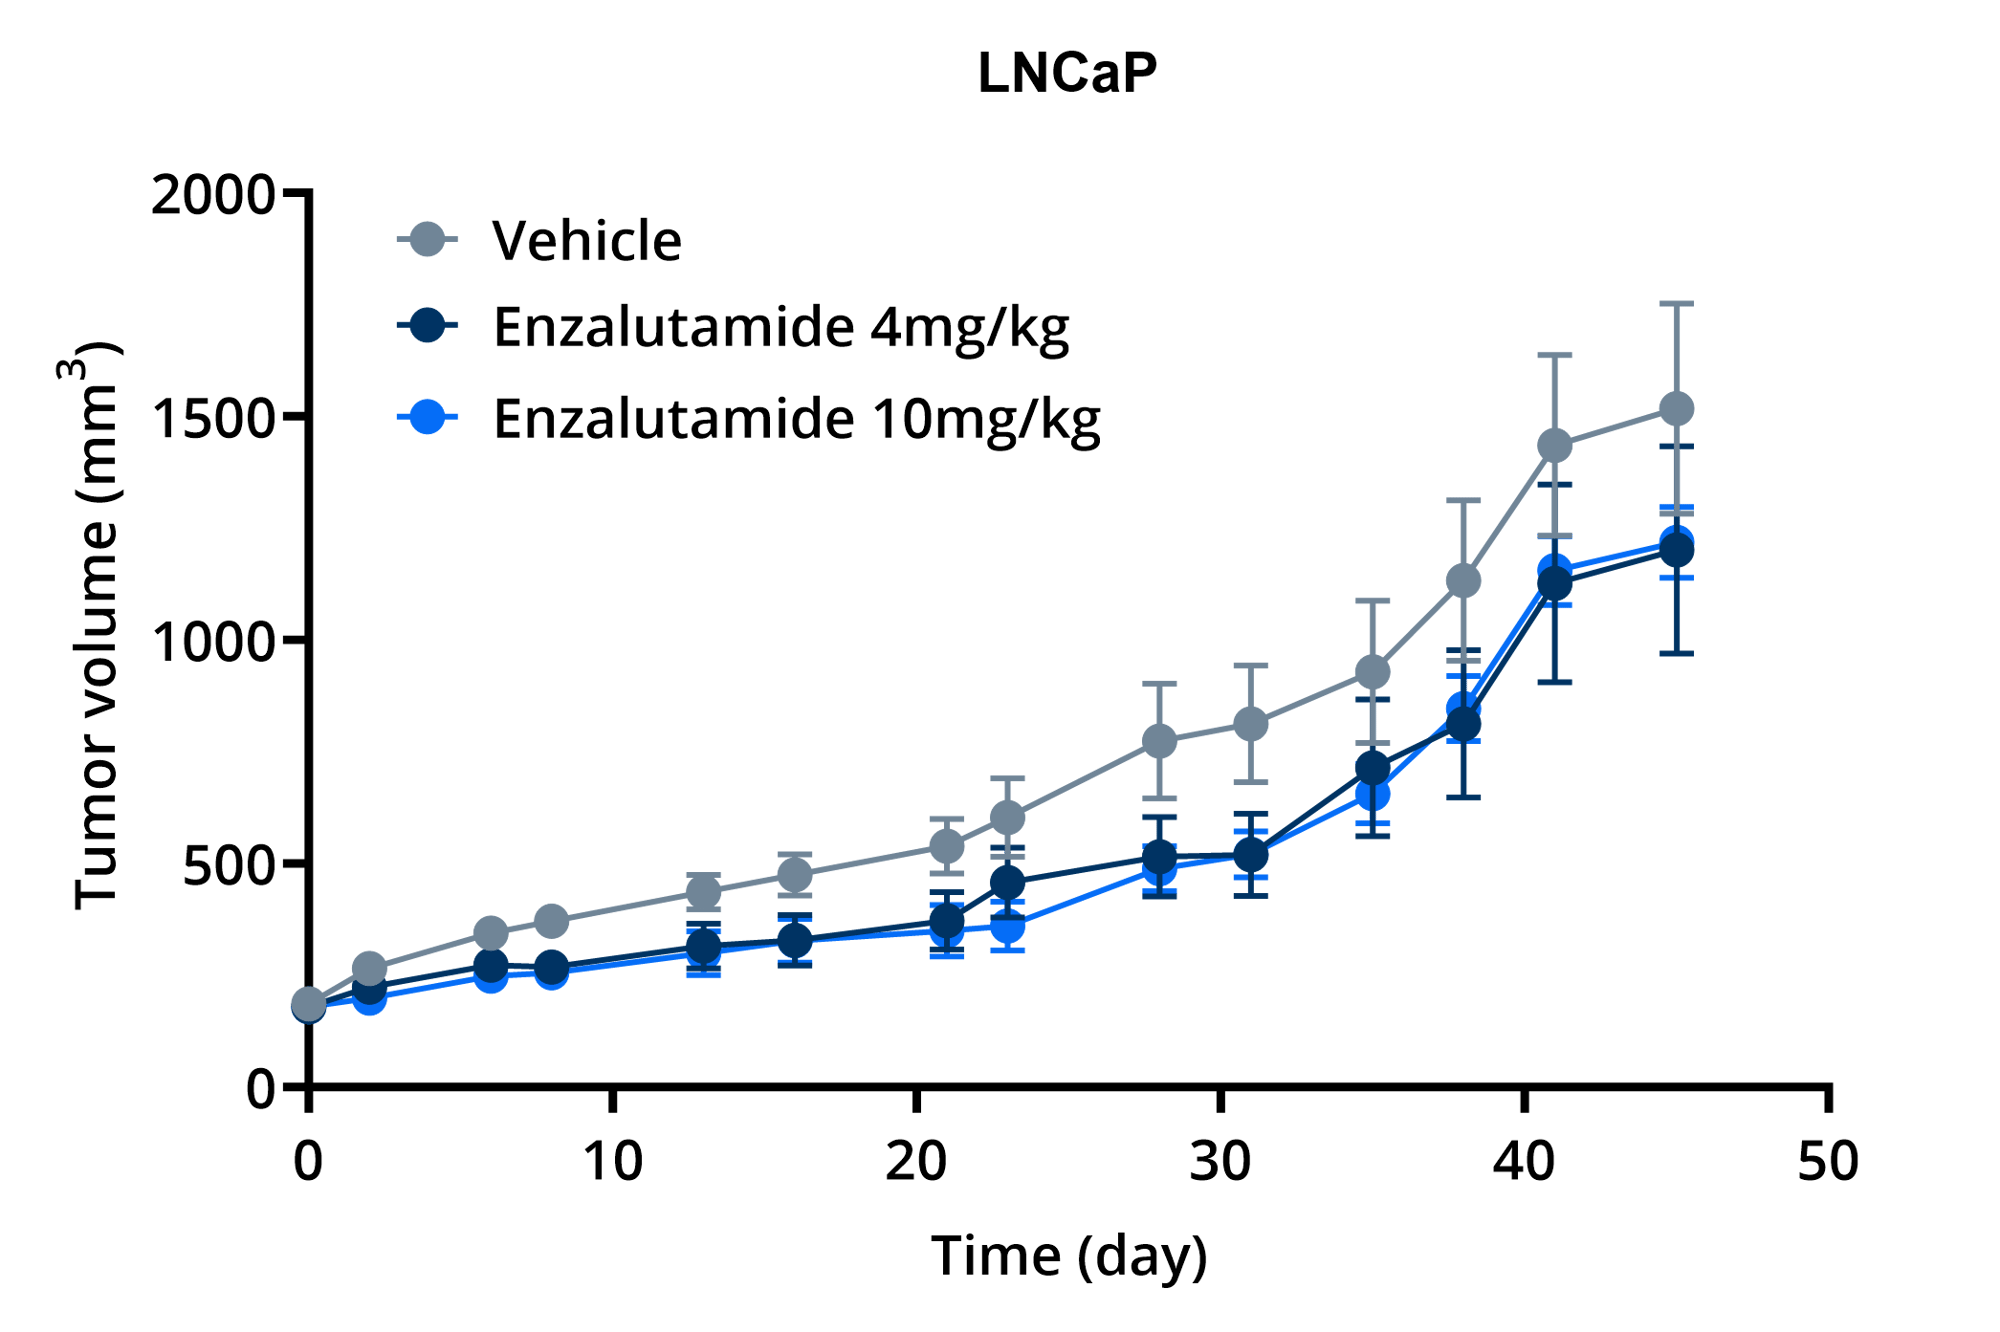 Results of LNCaP cell line-derived Xenograft model being tested with two doses of Enzalutamide.